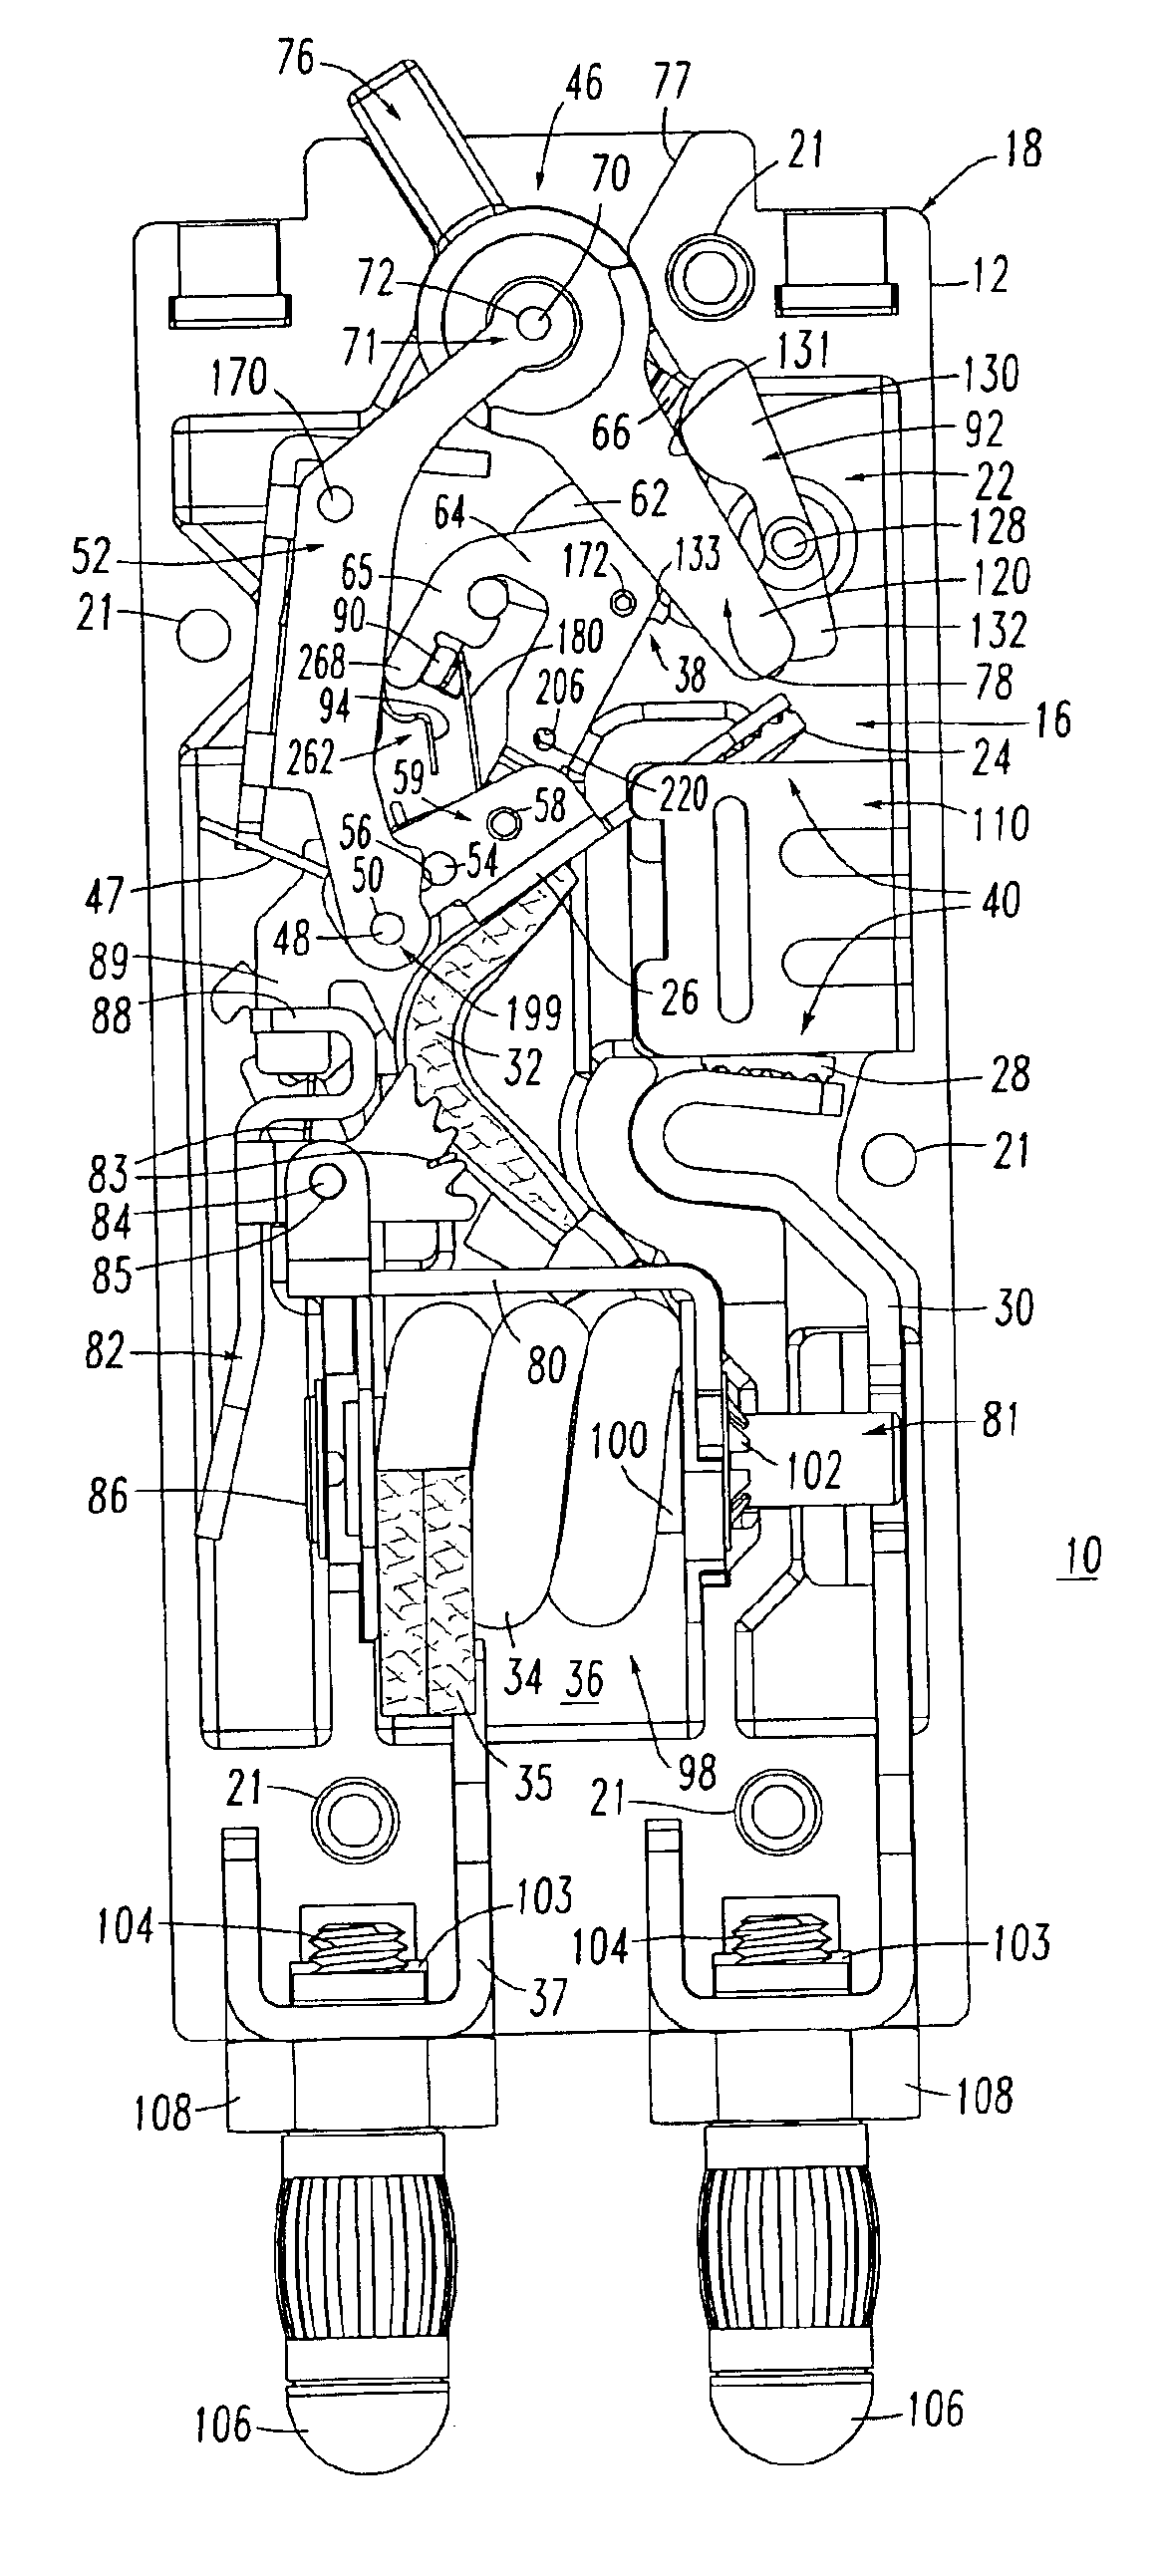 Circuit breaker including extension spring(s) between operating mechanism pivot and operating handle